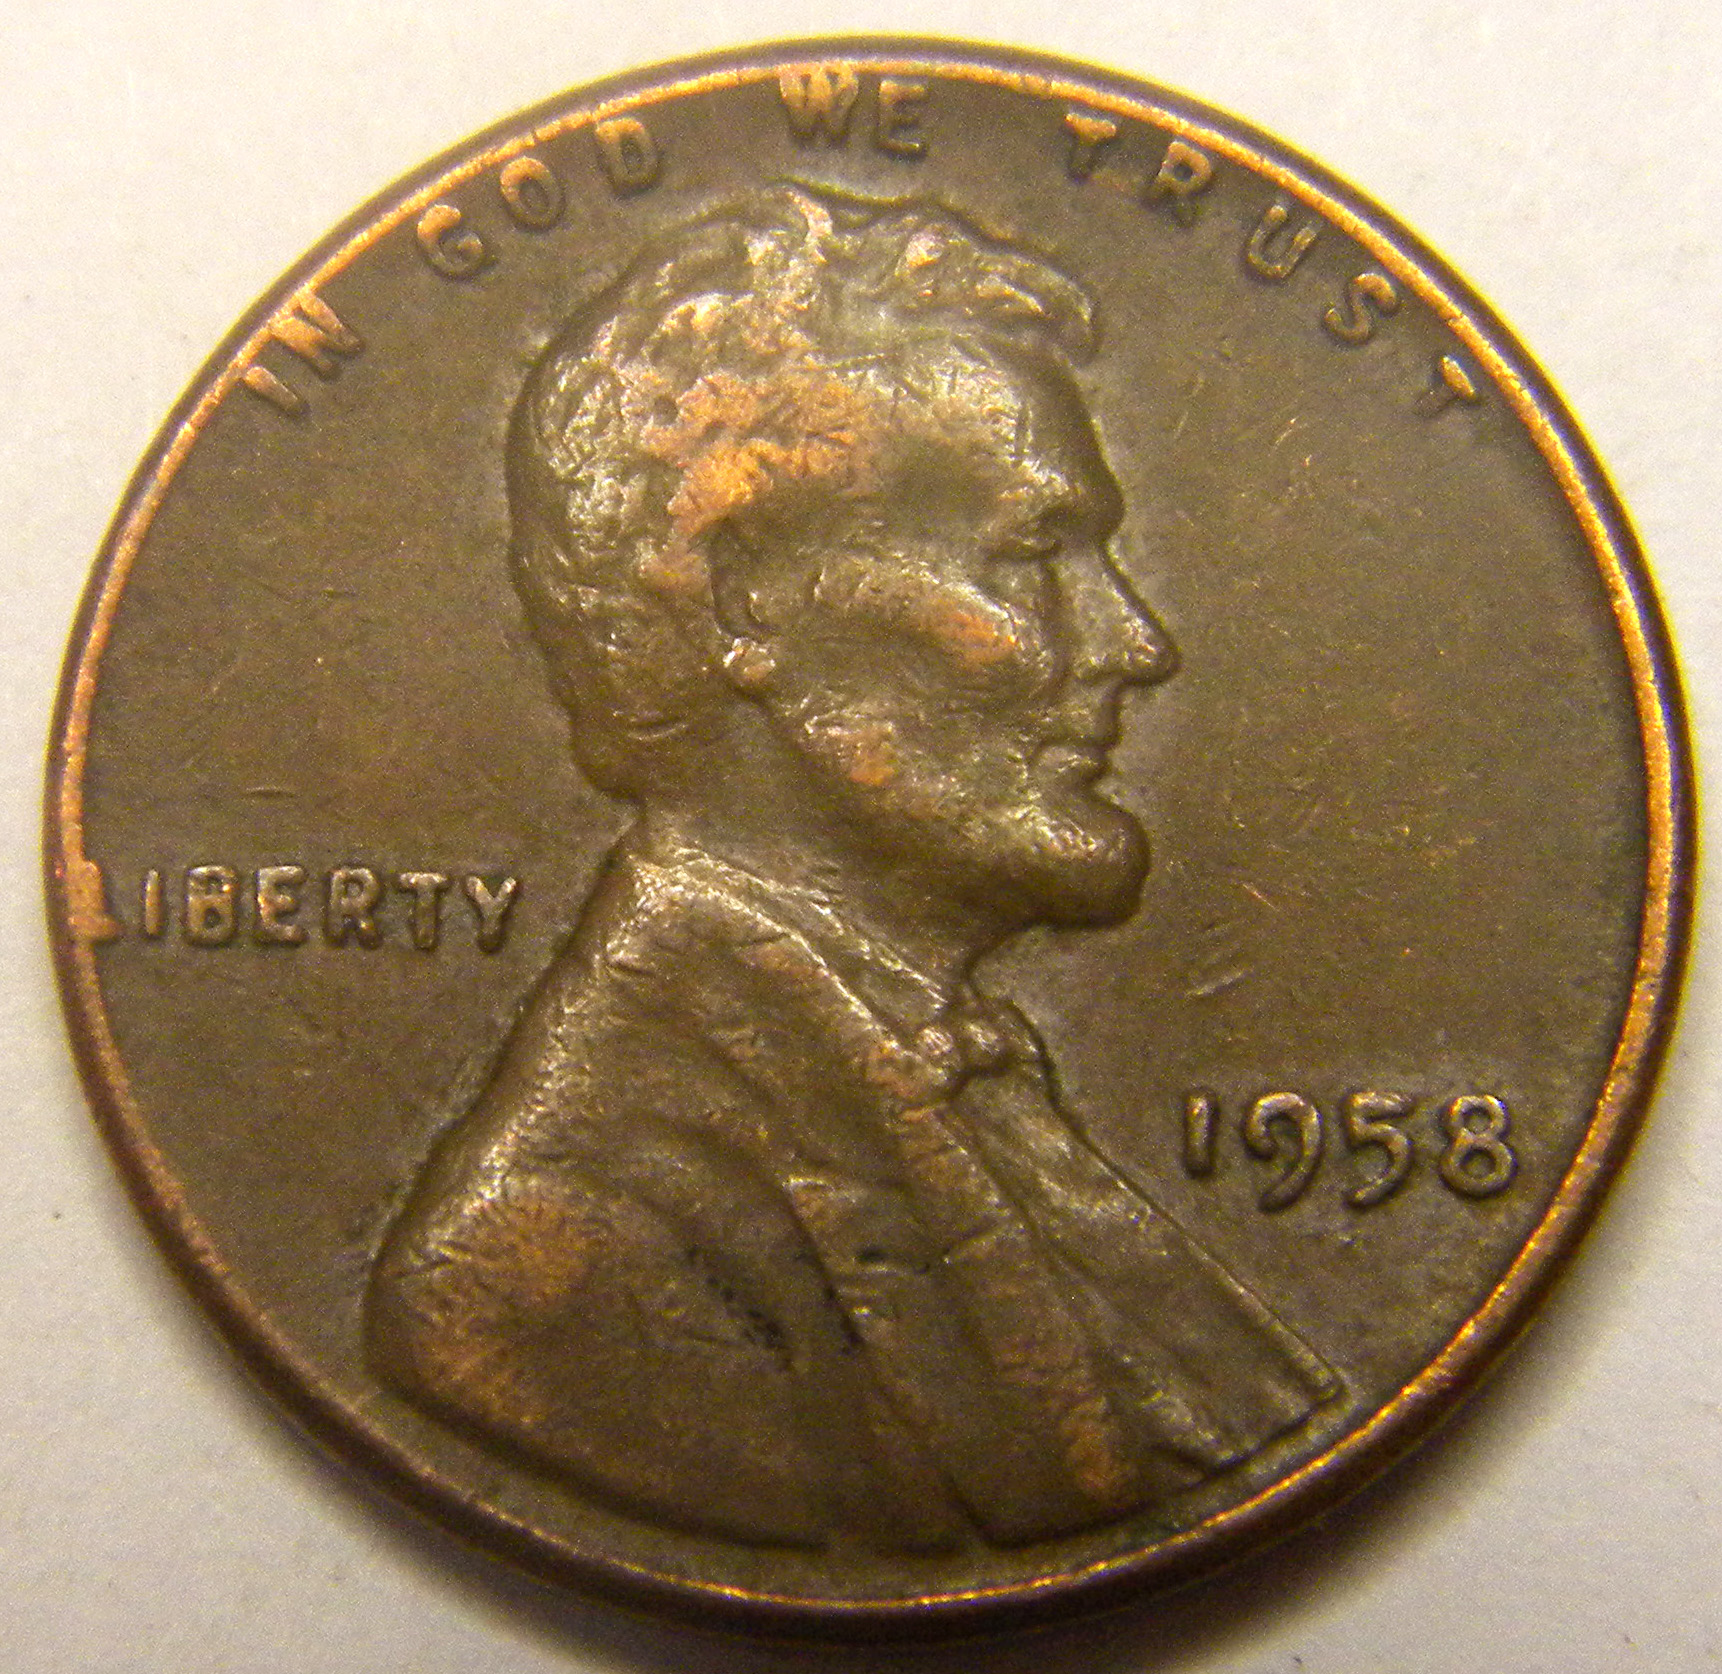 1958 Lincoln Wheat Penny Obverse.jpg